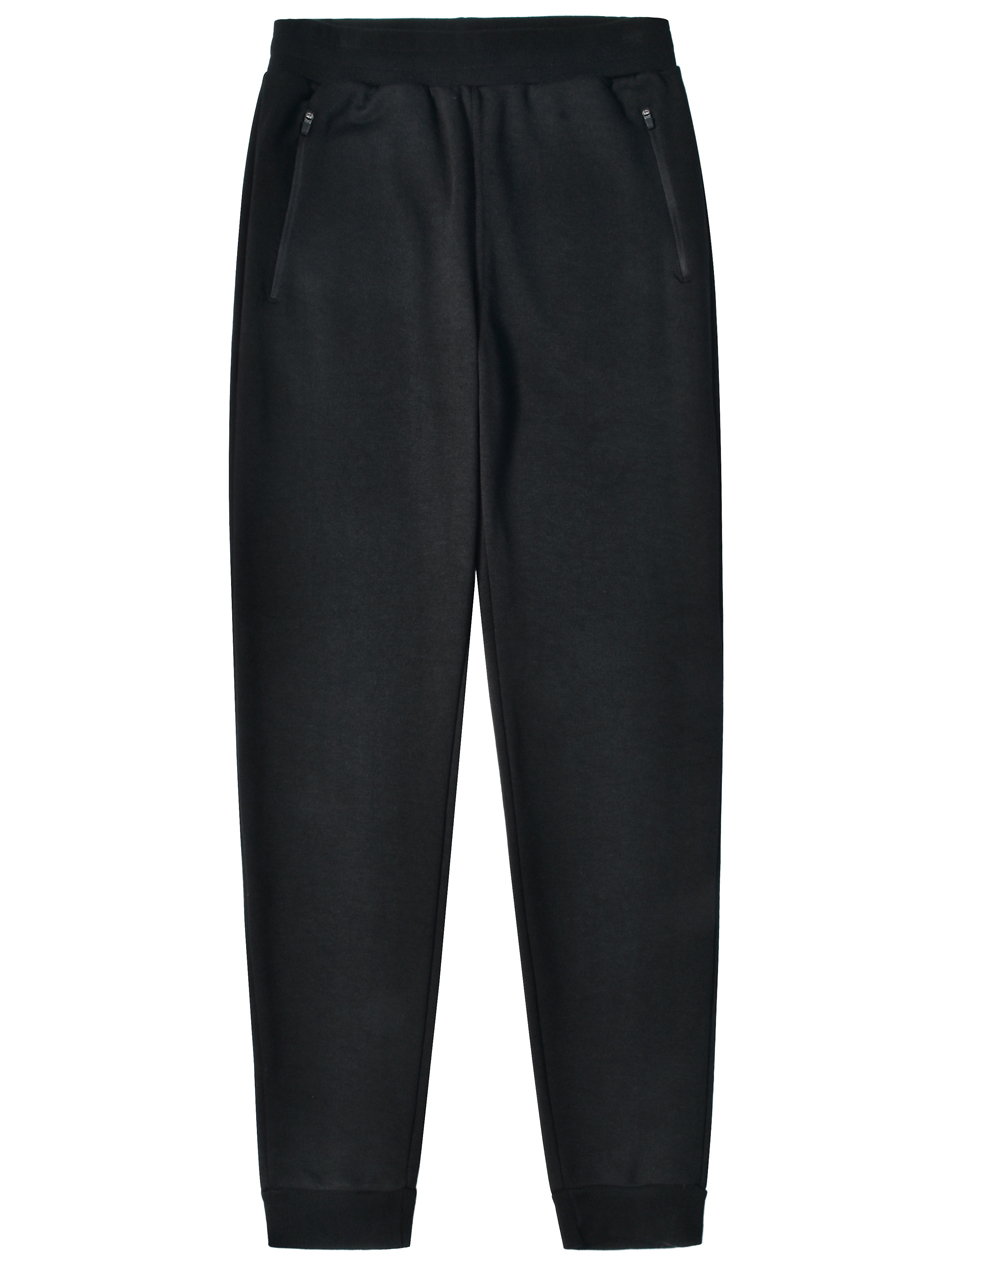 TP25/TP25K ADULTS & KIDS FRENCH TERRY TRACK PANTS